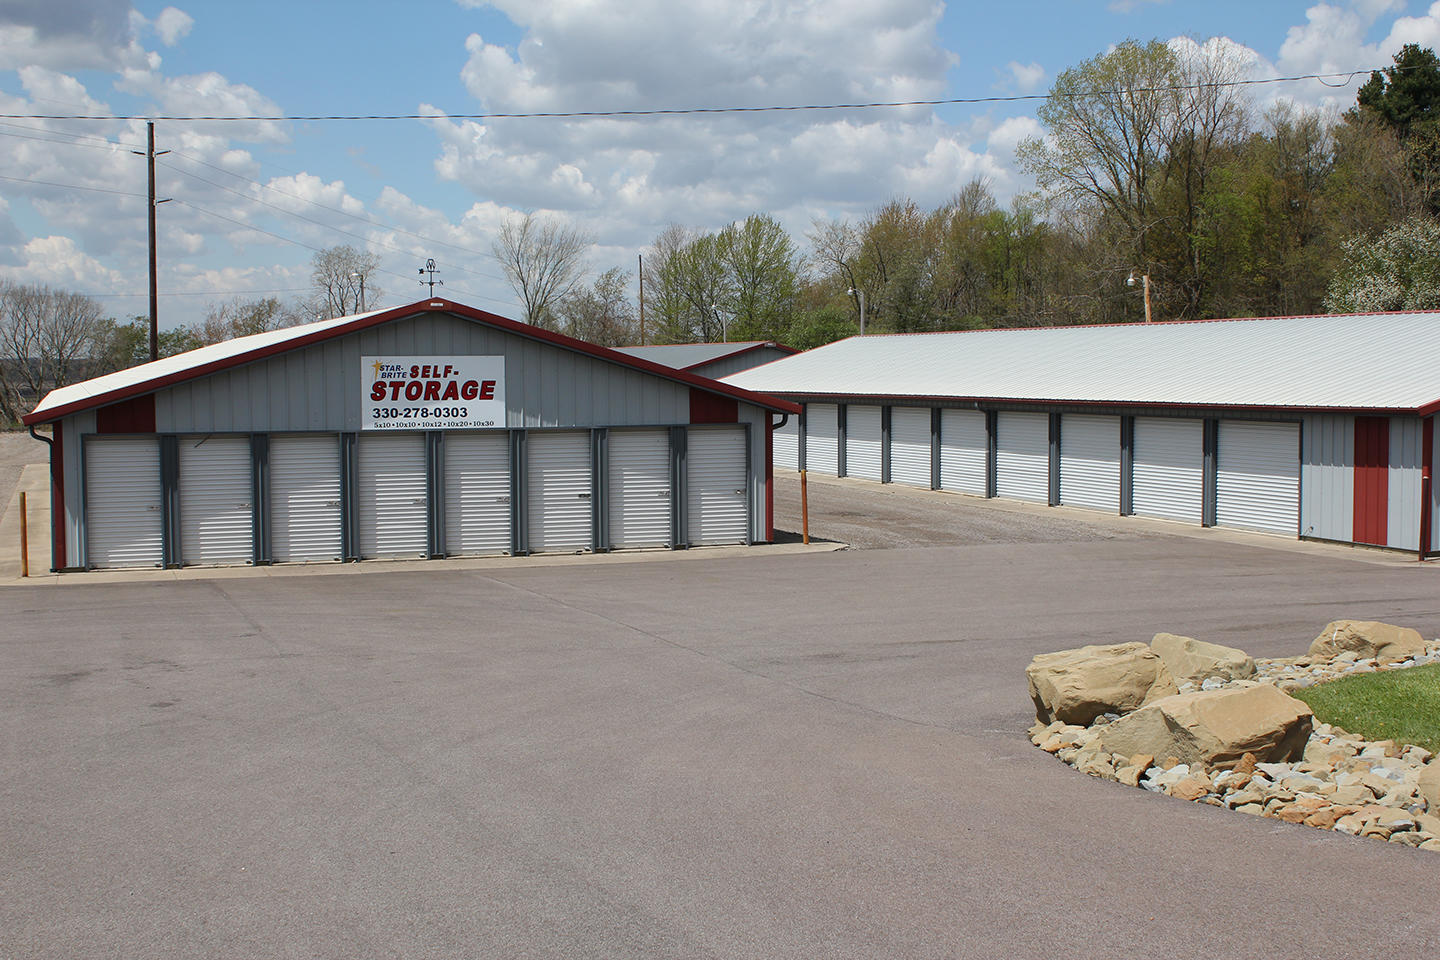 Conveniently located in East Central Ohio, our storage rentals are well maintained, are clean and provide ample space.